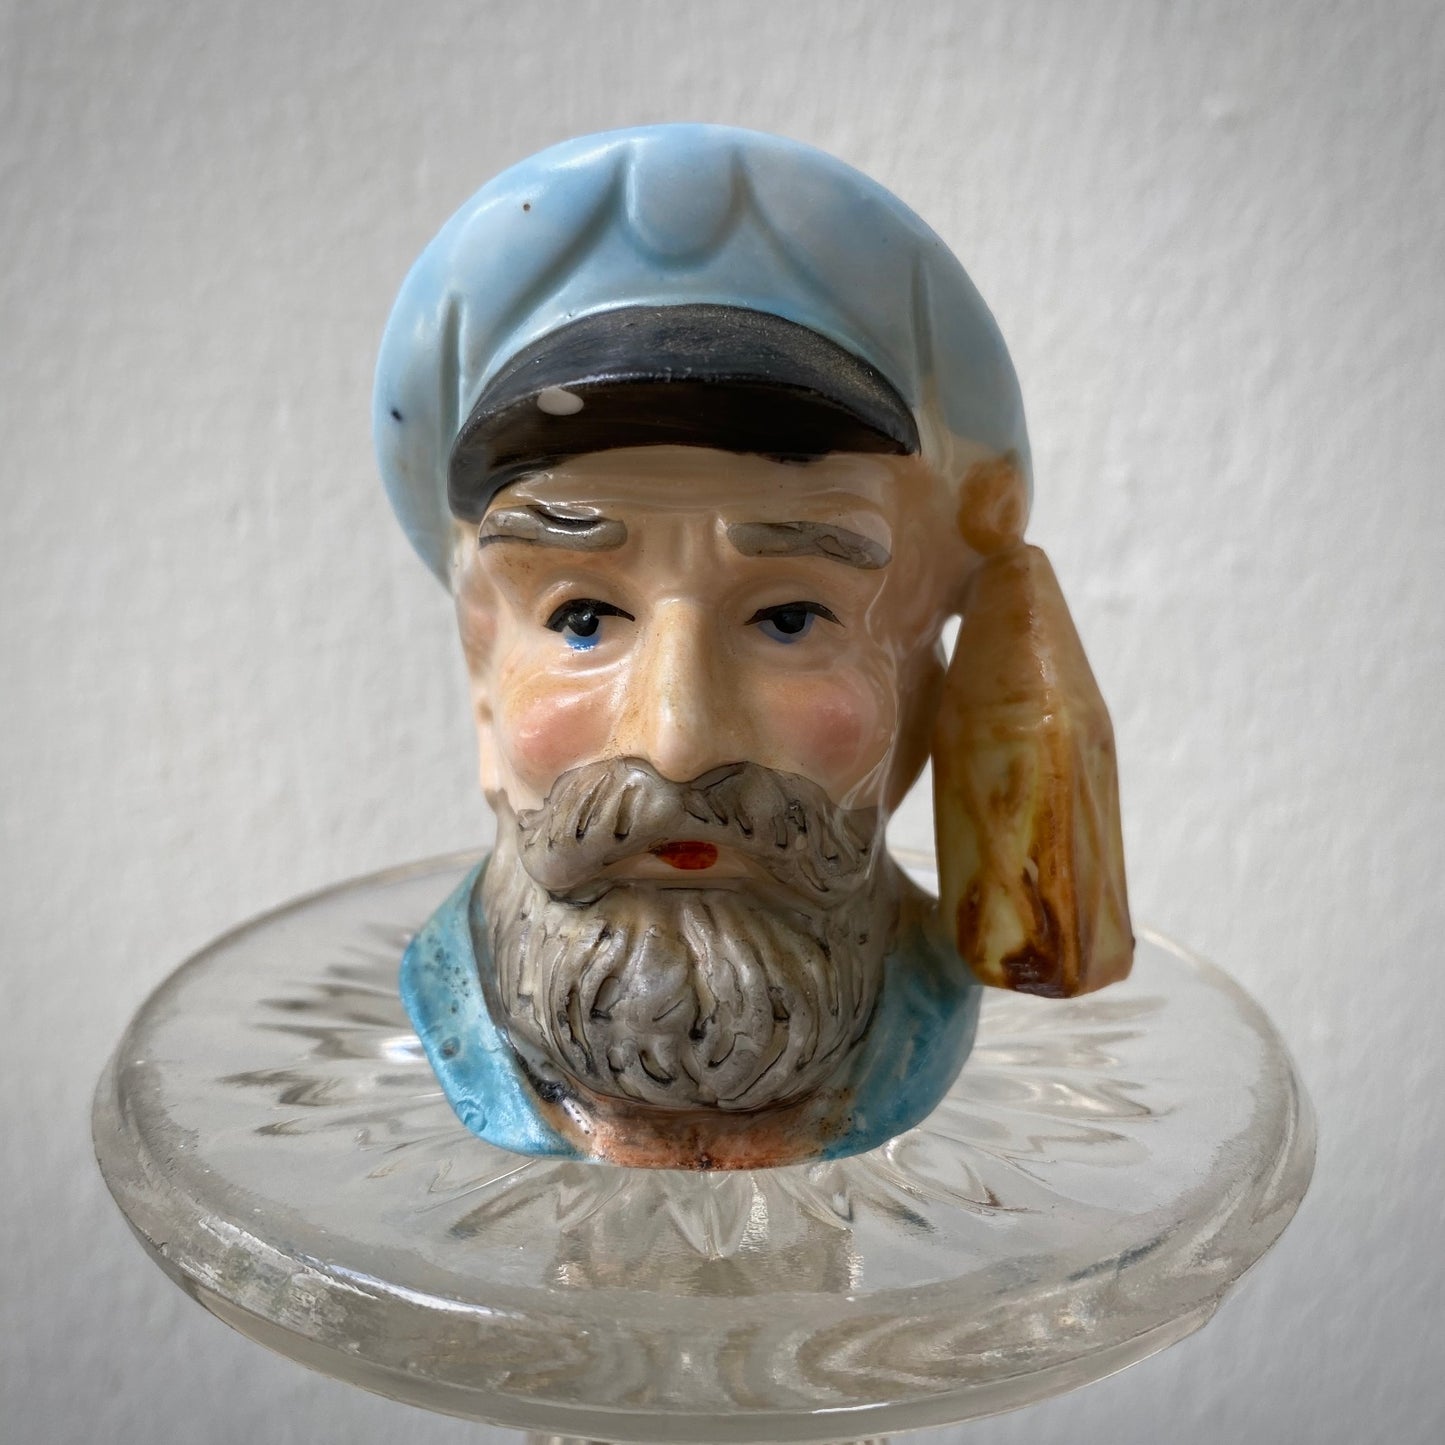 Vintage English Toby Jug featuring a Sea Captain character